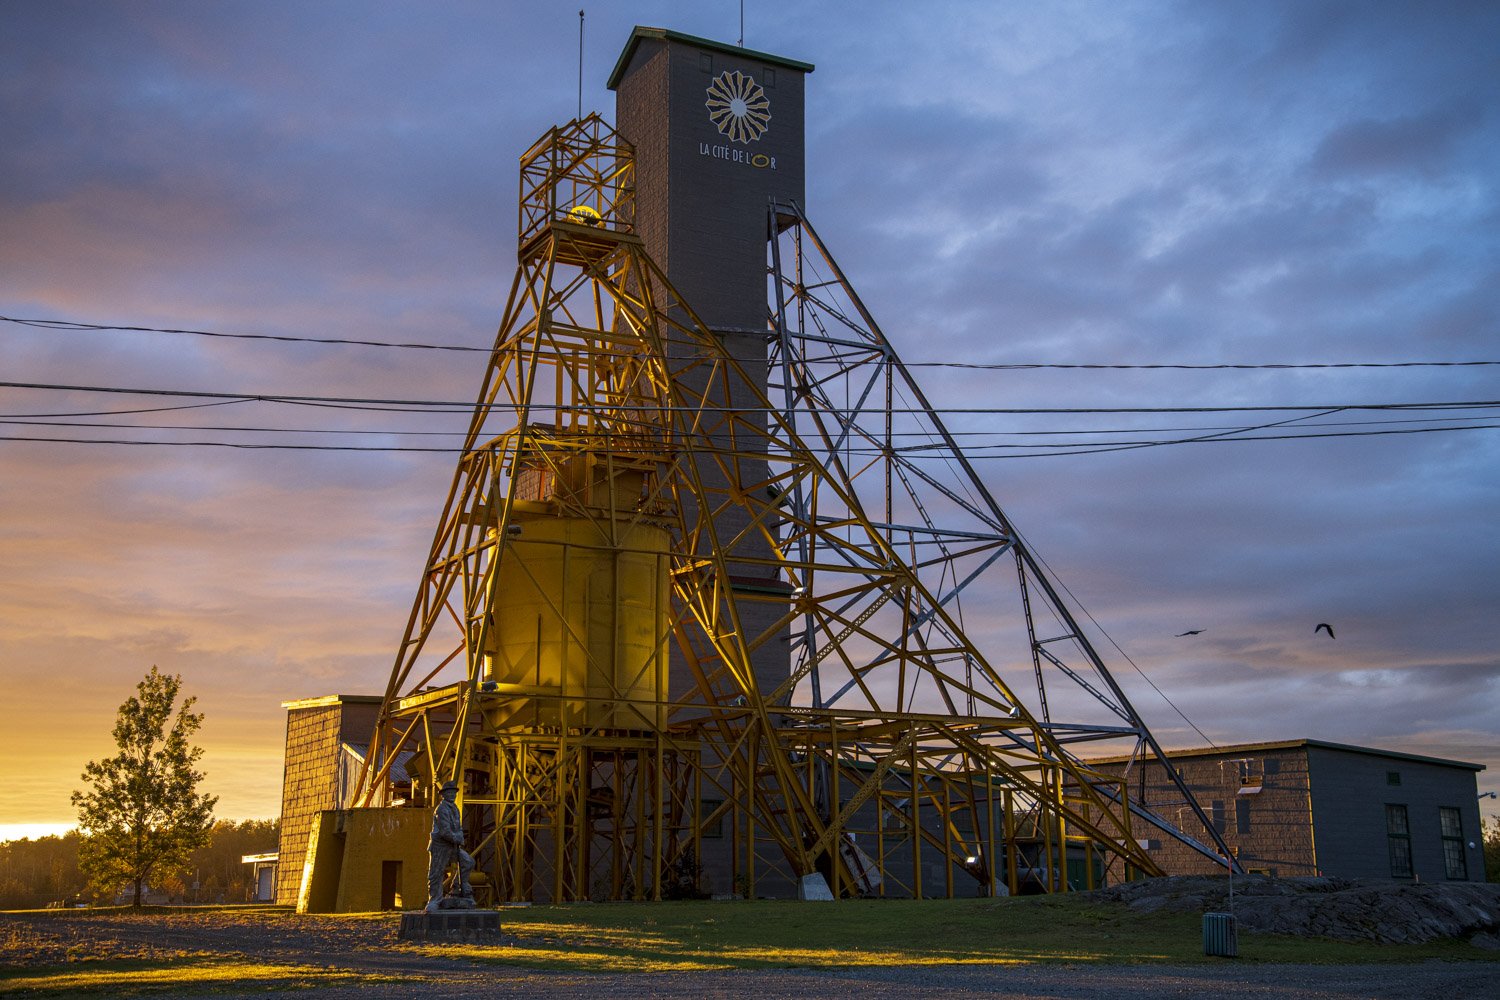  The old mine shaft of the former Lamaque mine was restored in 1995 after a fire damaged the exterior of the structure. It has become a cultural and heritage symbol of the early mining boom in the Abitibi region of the 1930s. 